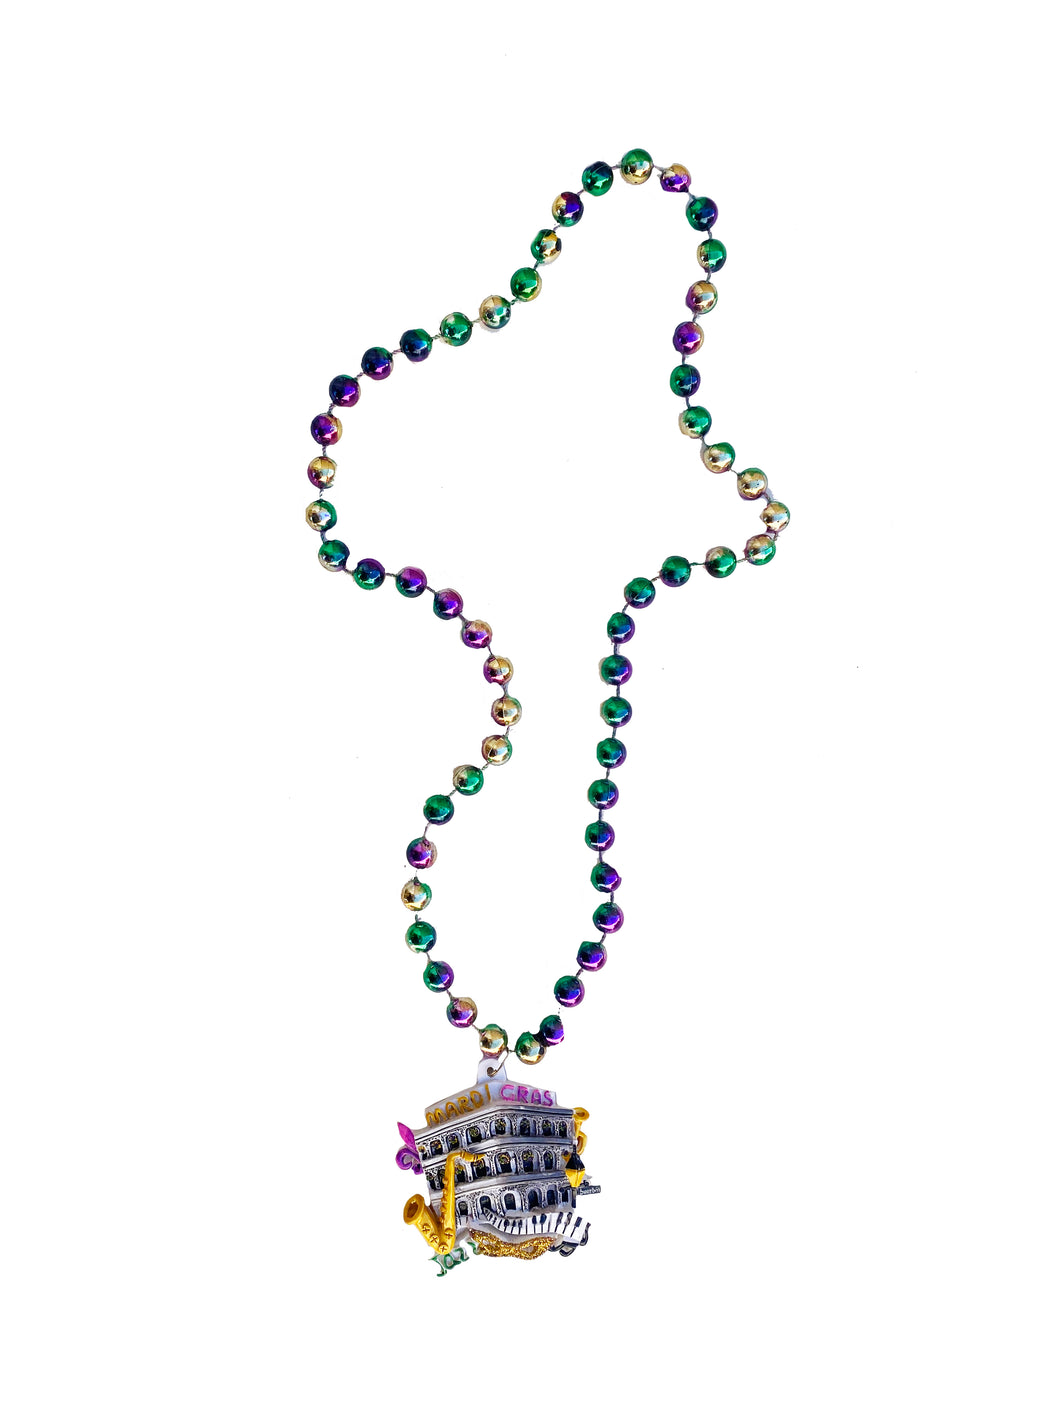 French Quarter Balcony Medallion on Purple, Green, and Gold Specialty Bead